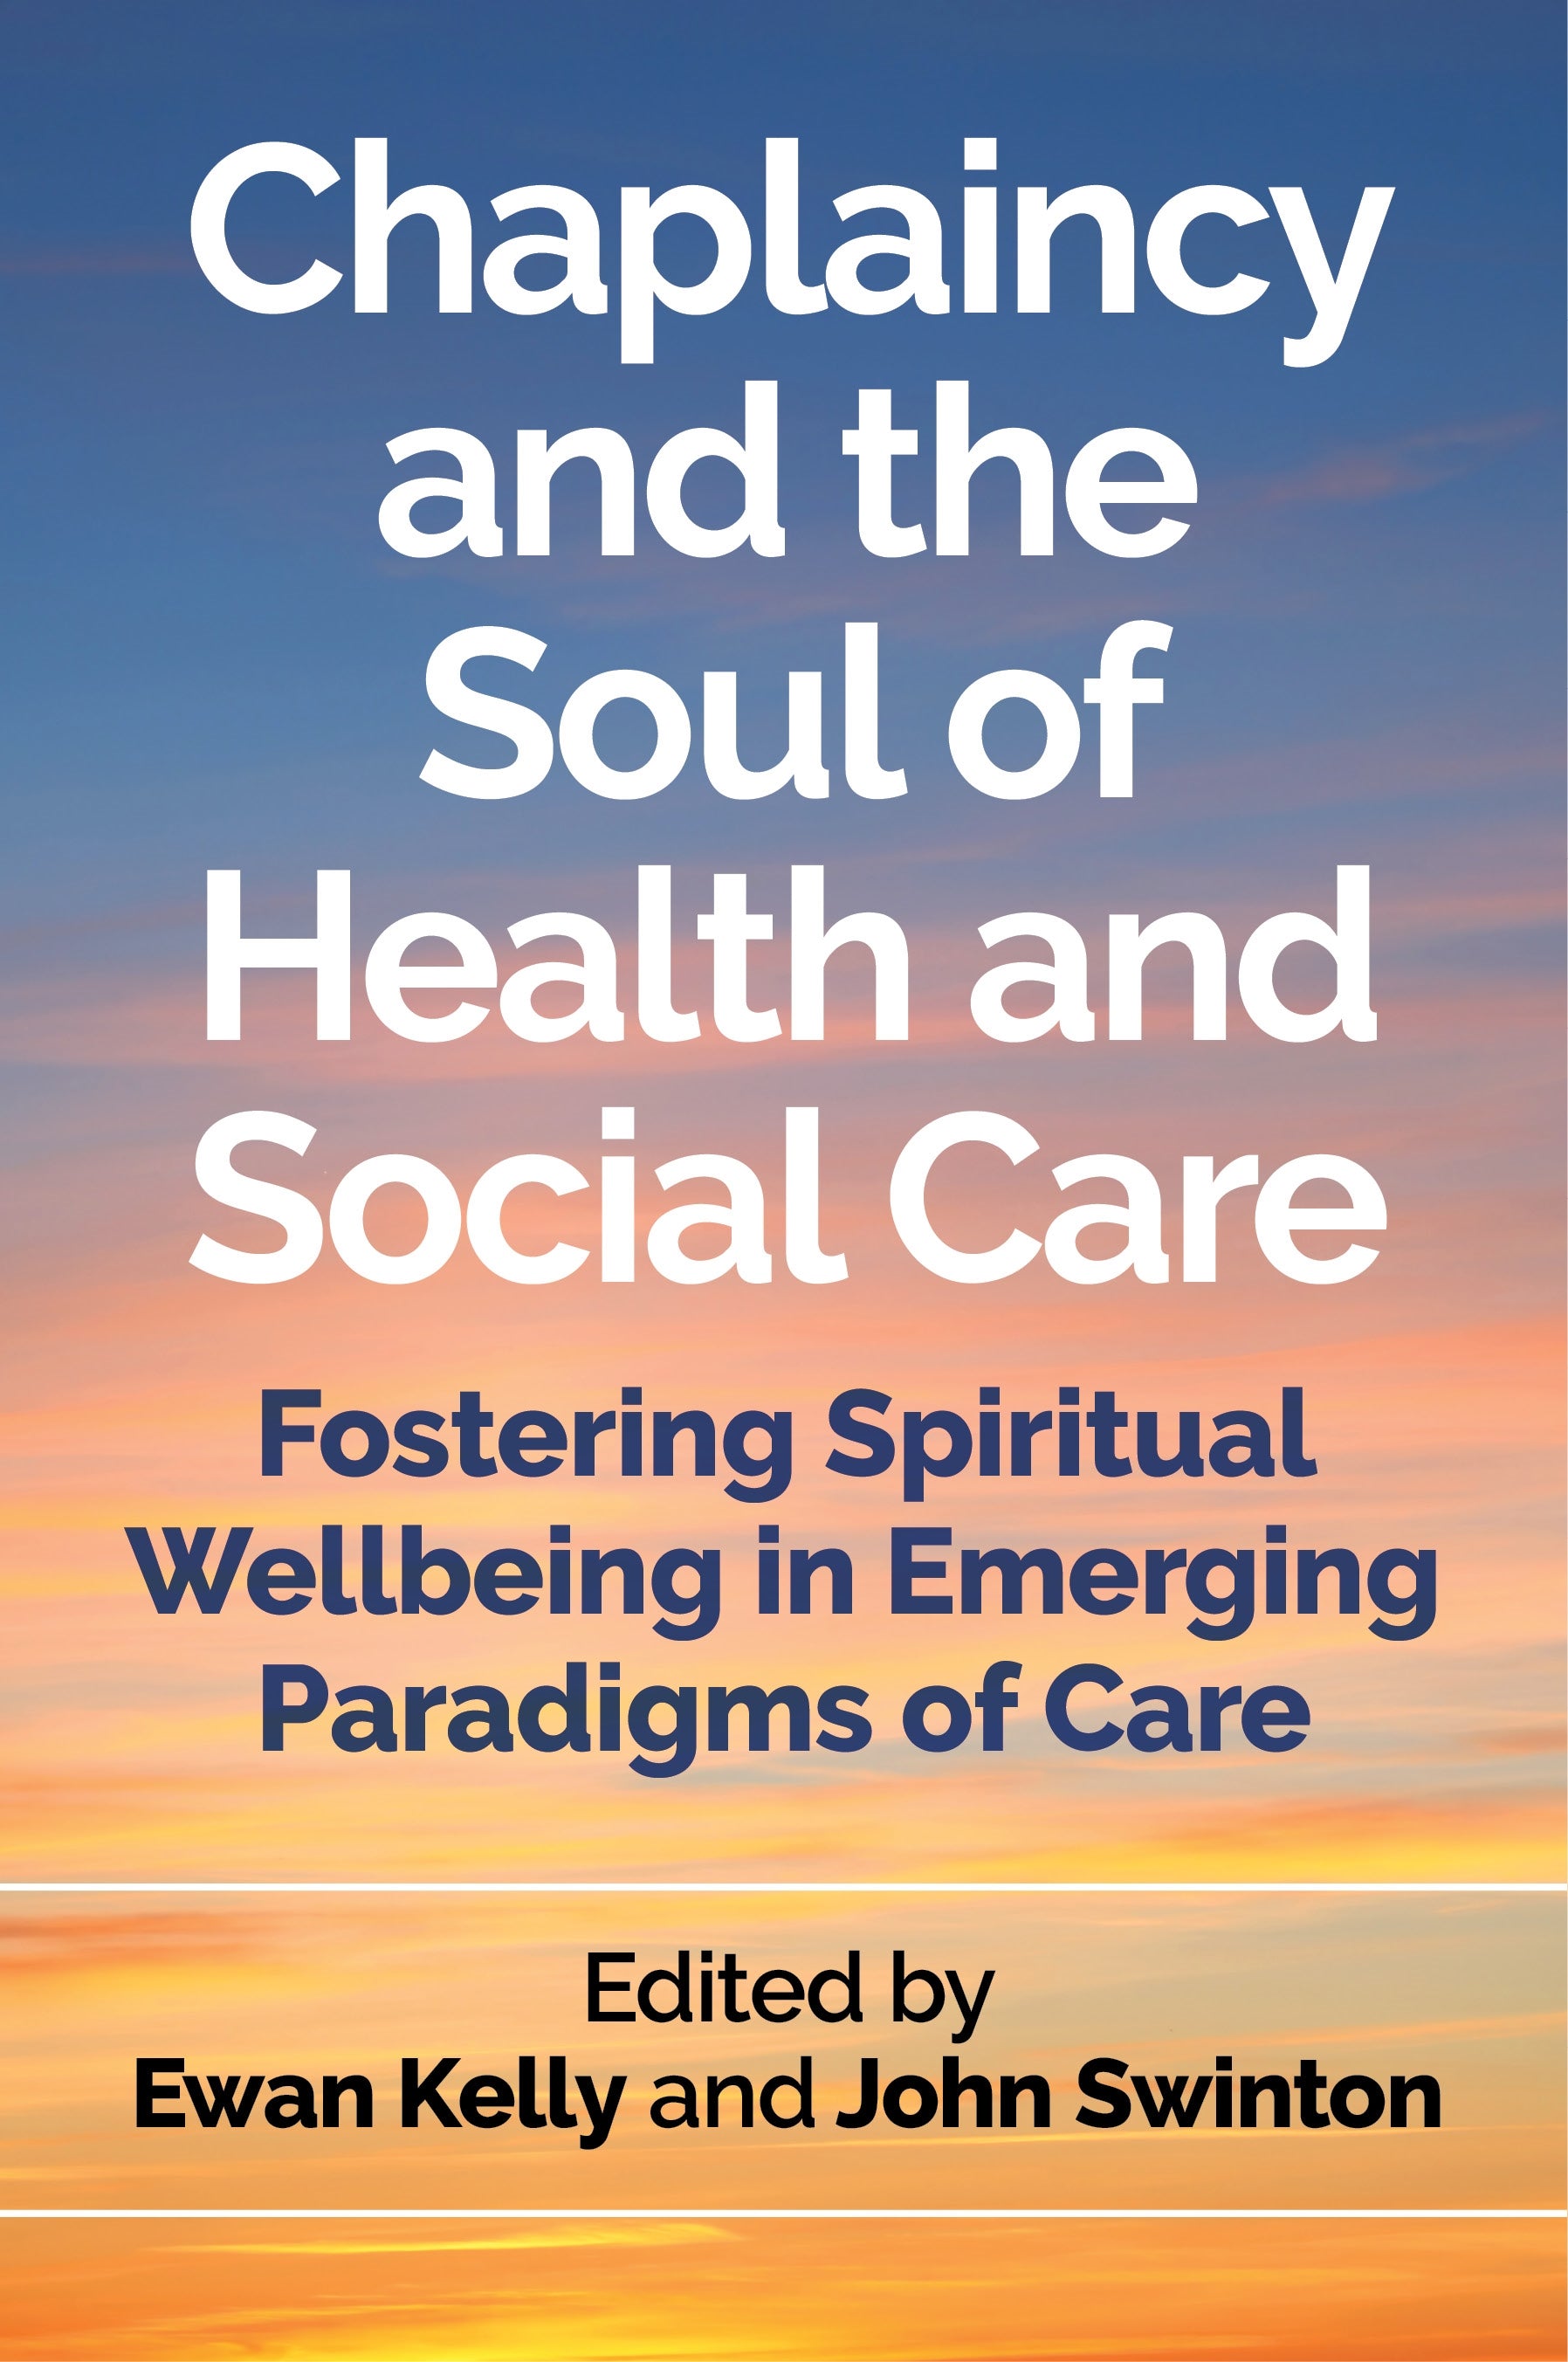 Chaplaincy and the Soul of Health and Social Care by Ewan Kelly, John Swinton, No Author Listed, Stephen Pattison